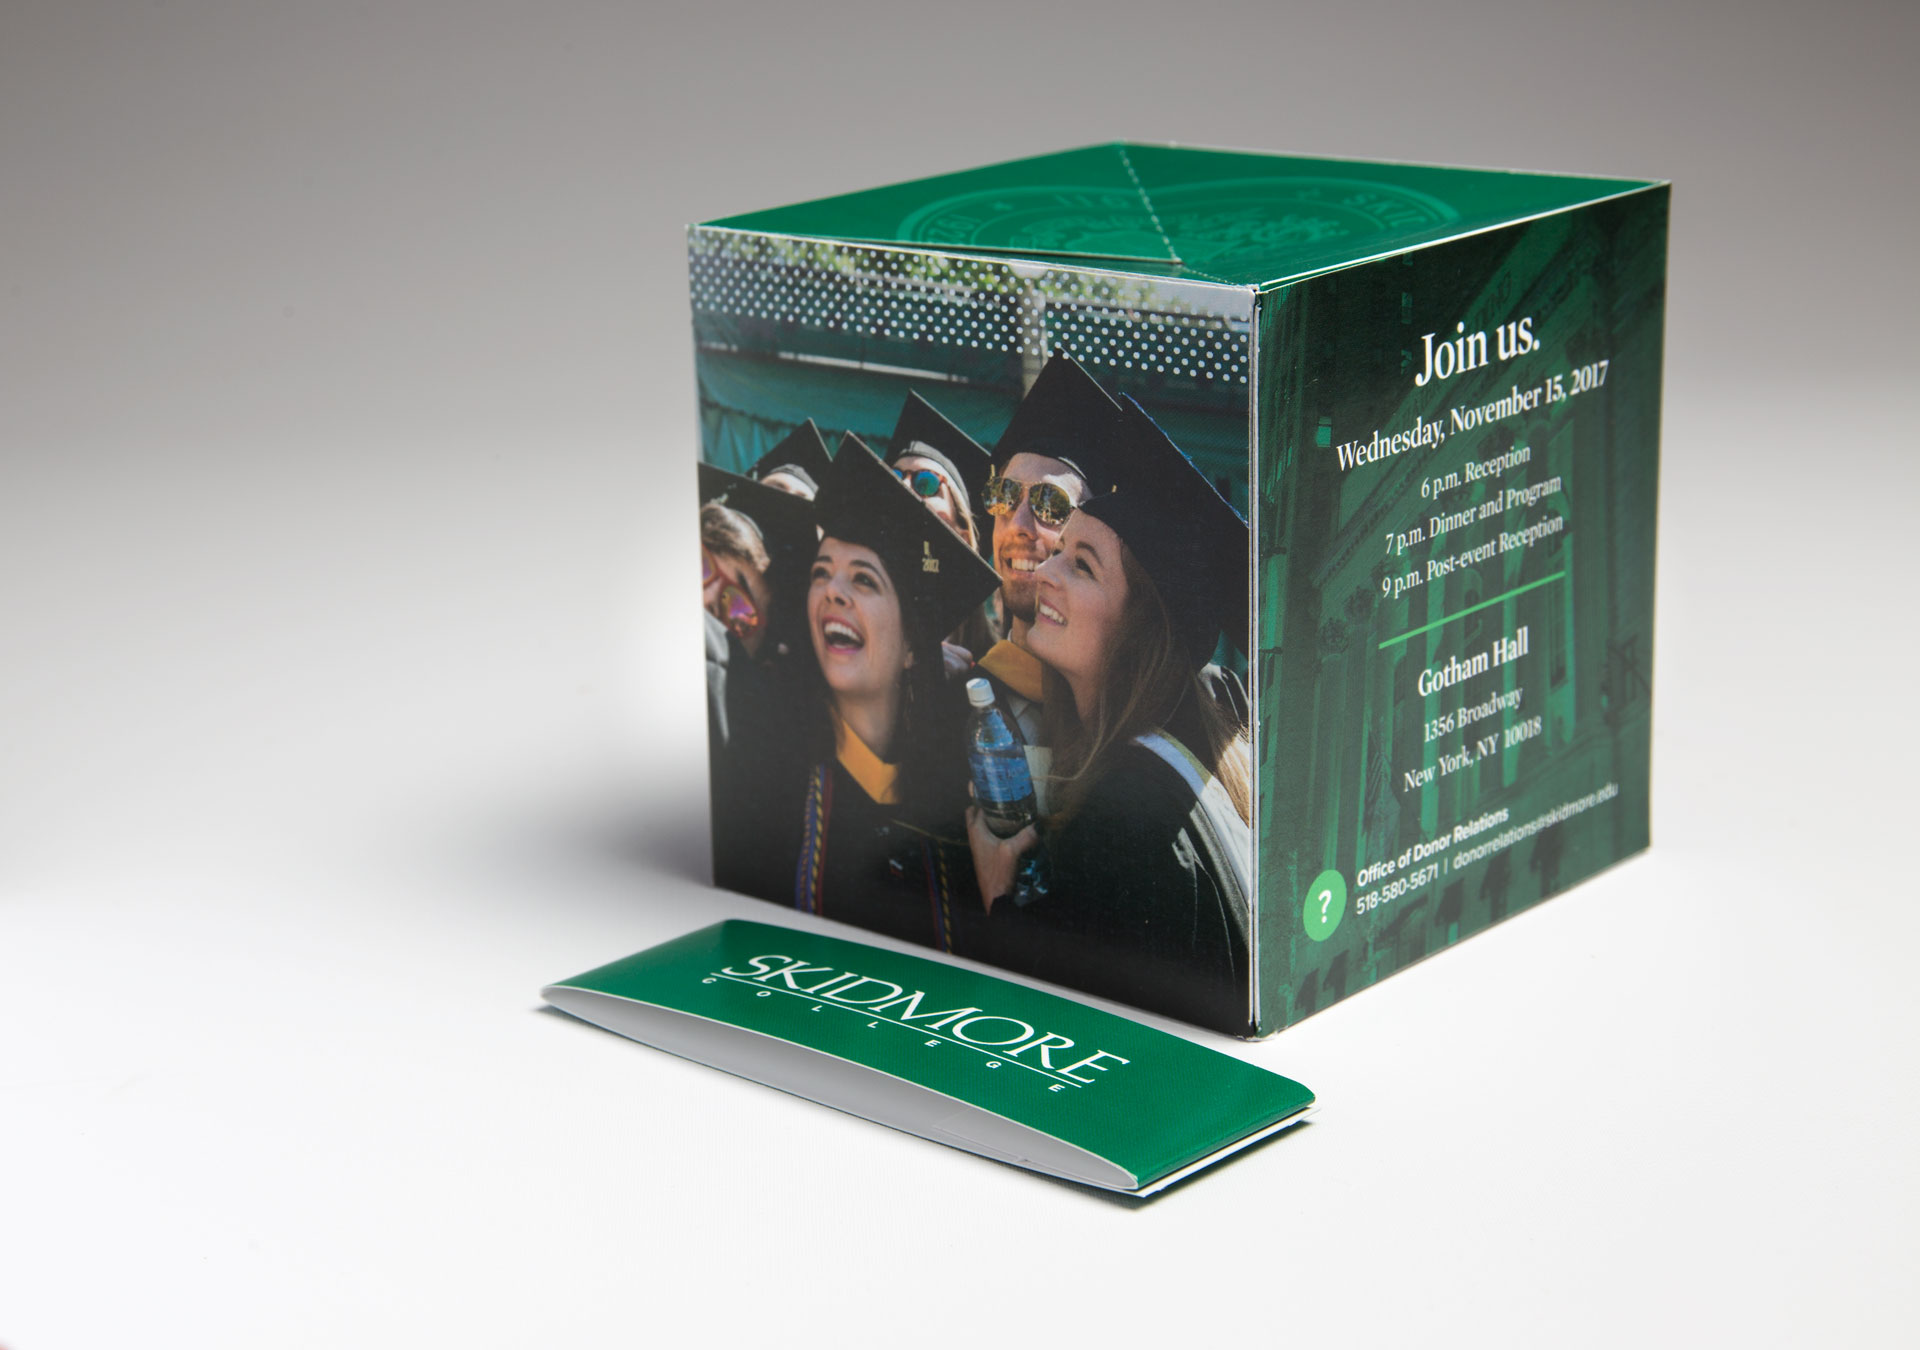 Skidmore College Uses the 4.25" Pop Up Cube to Send a Fundraising Gala Invitation that "Pops"